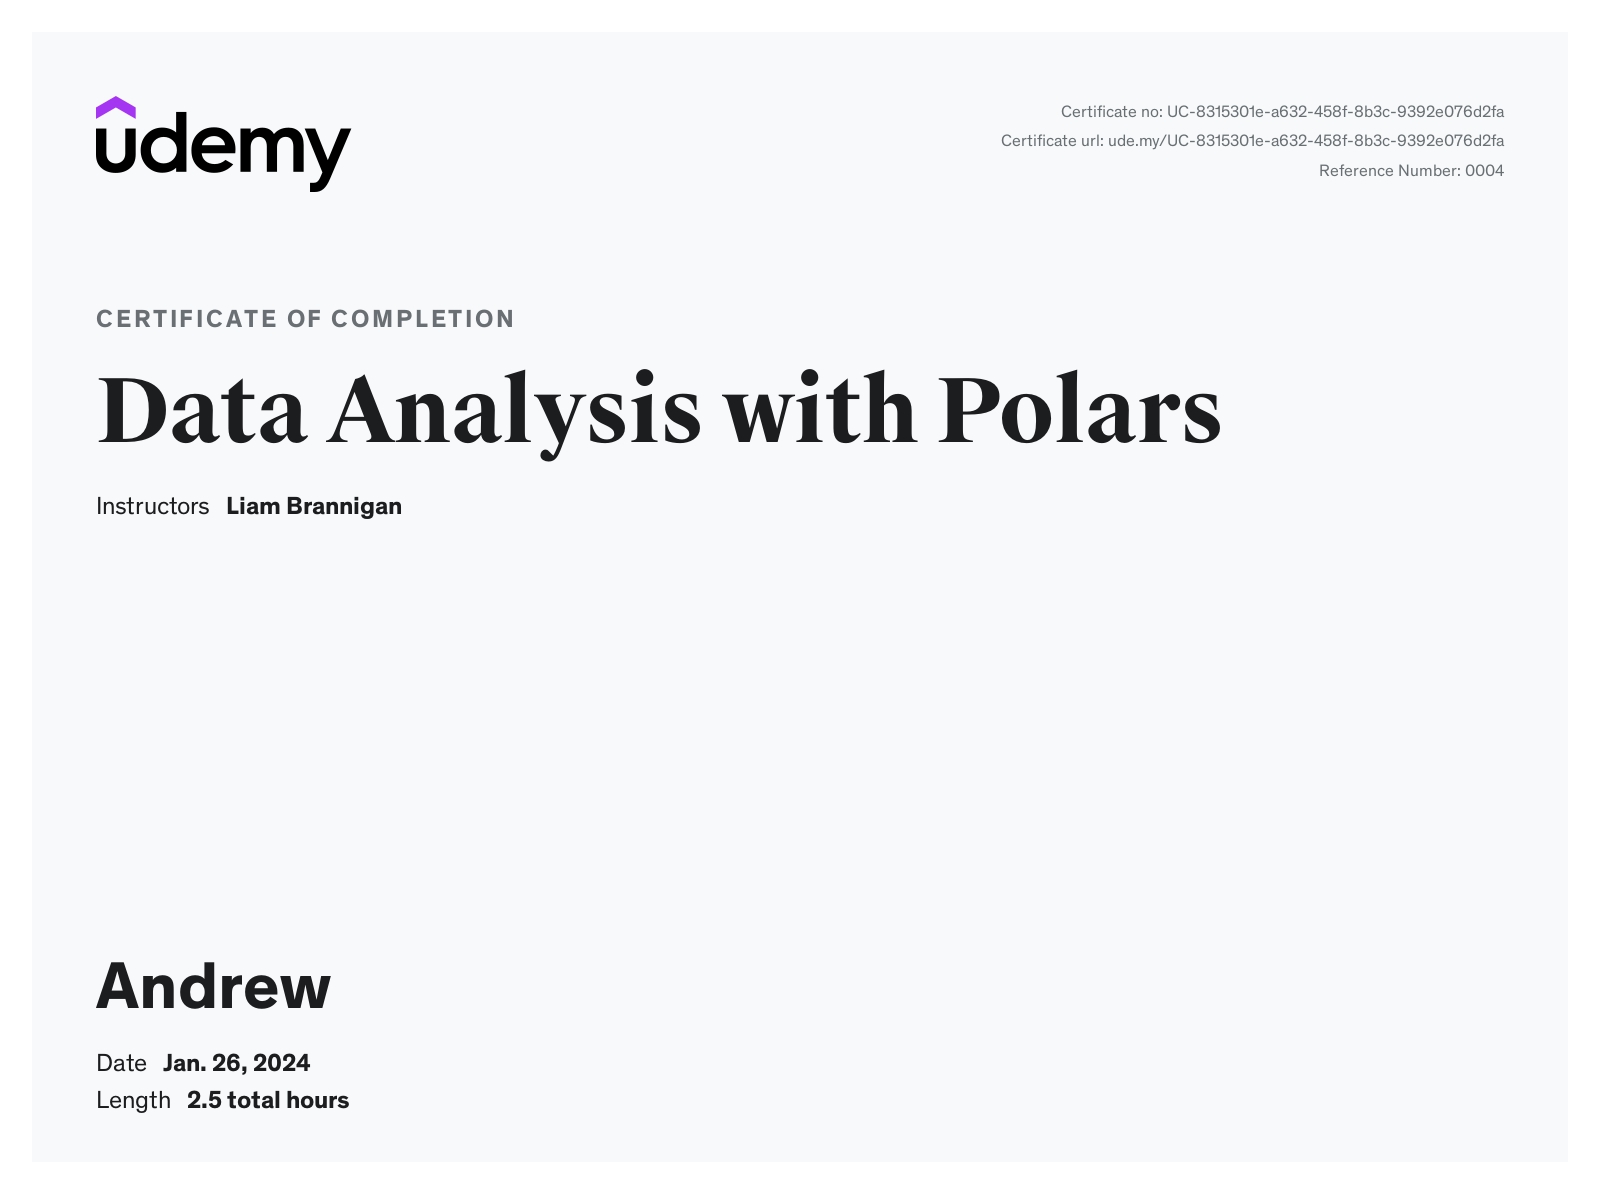 Data Analysis with Polars Completion Certificate